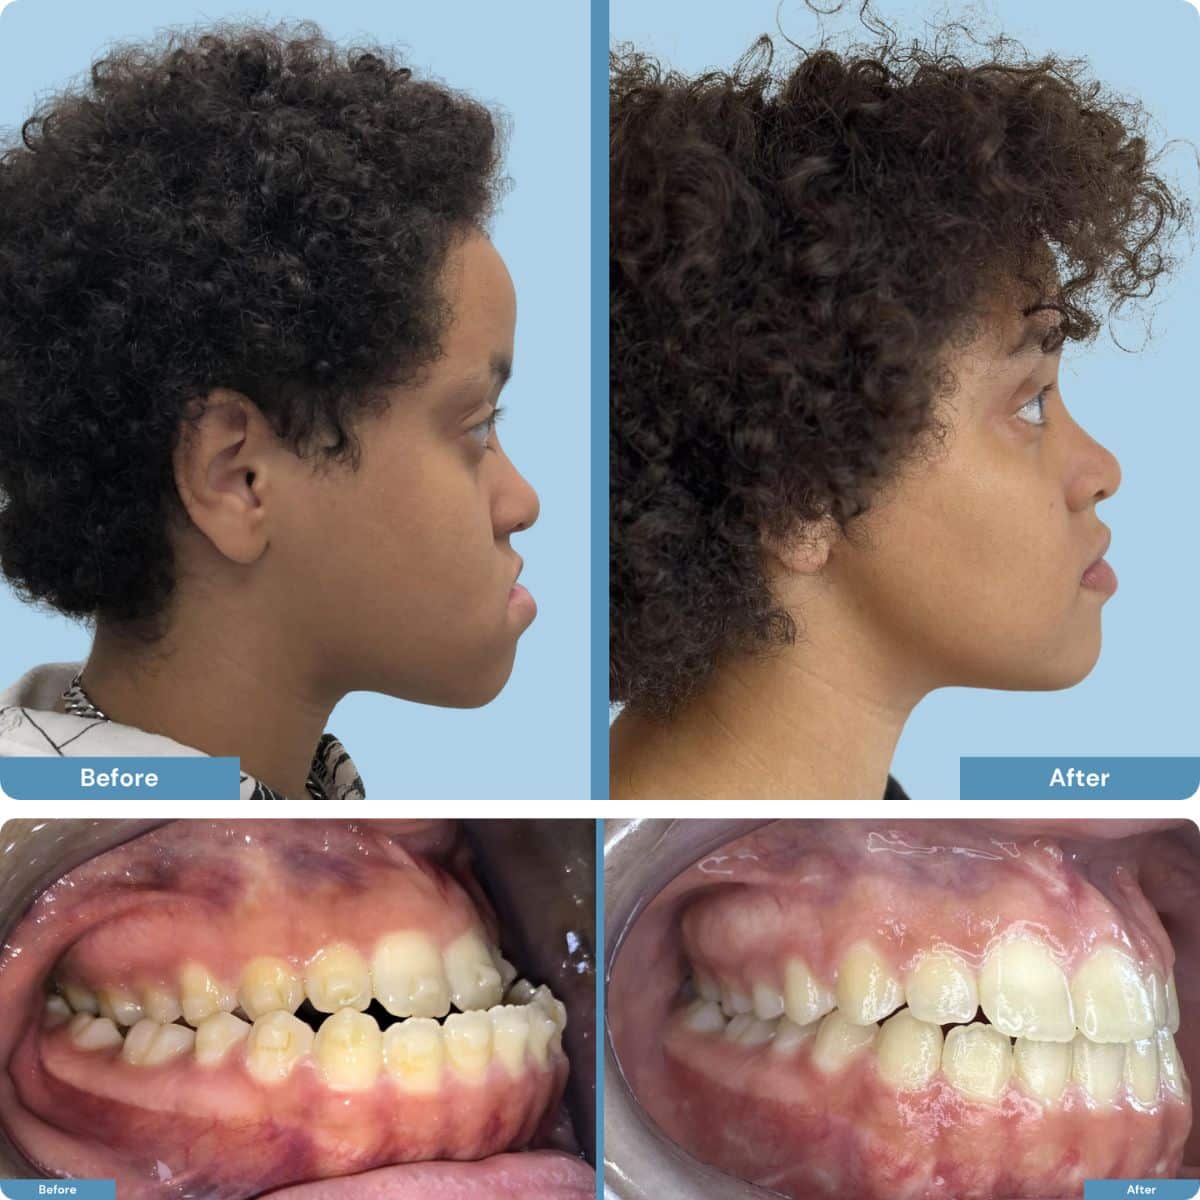 Before and after orthognathic jaw surgery on young person